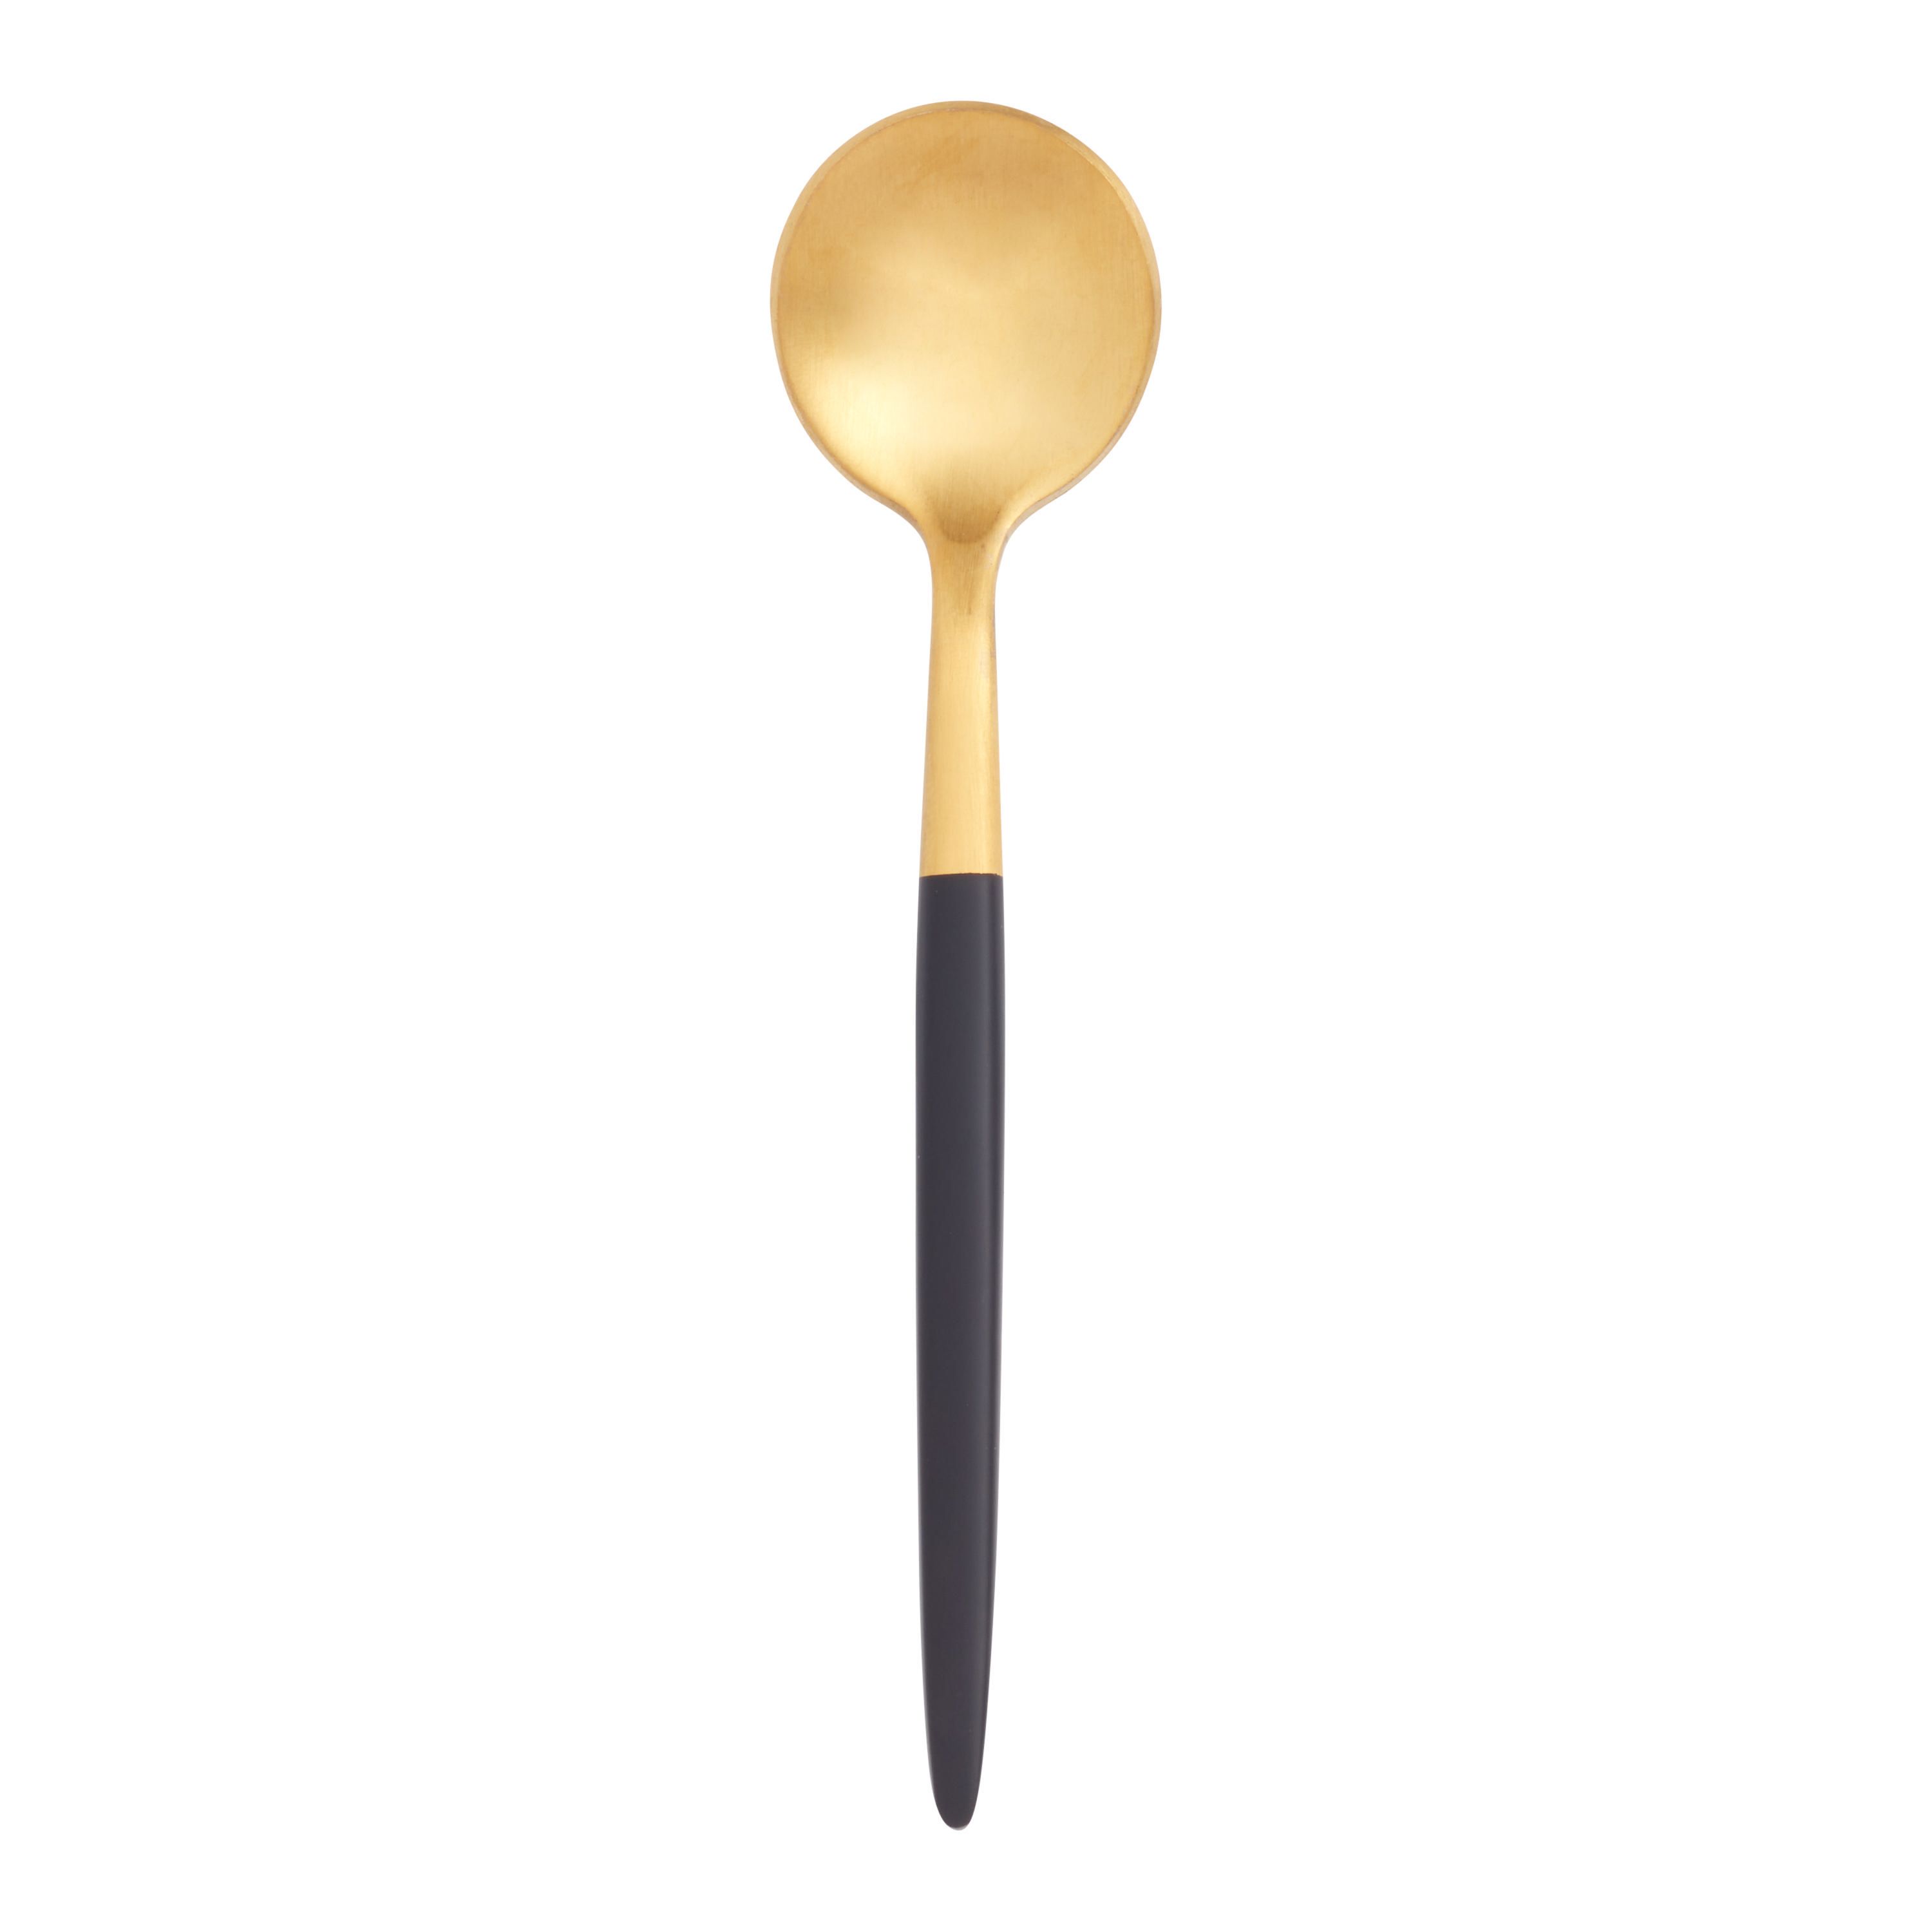 Black And Gold Shay Cocktail Spoon Set Of 2 | World Market